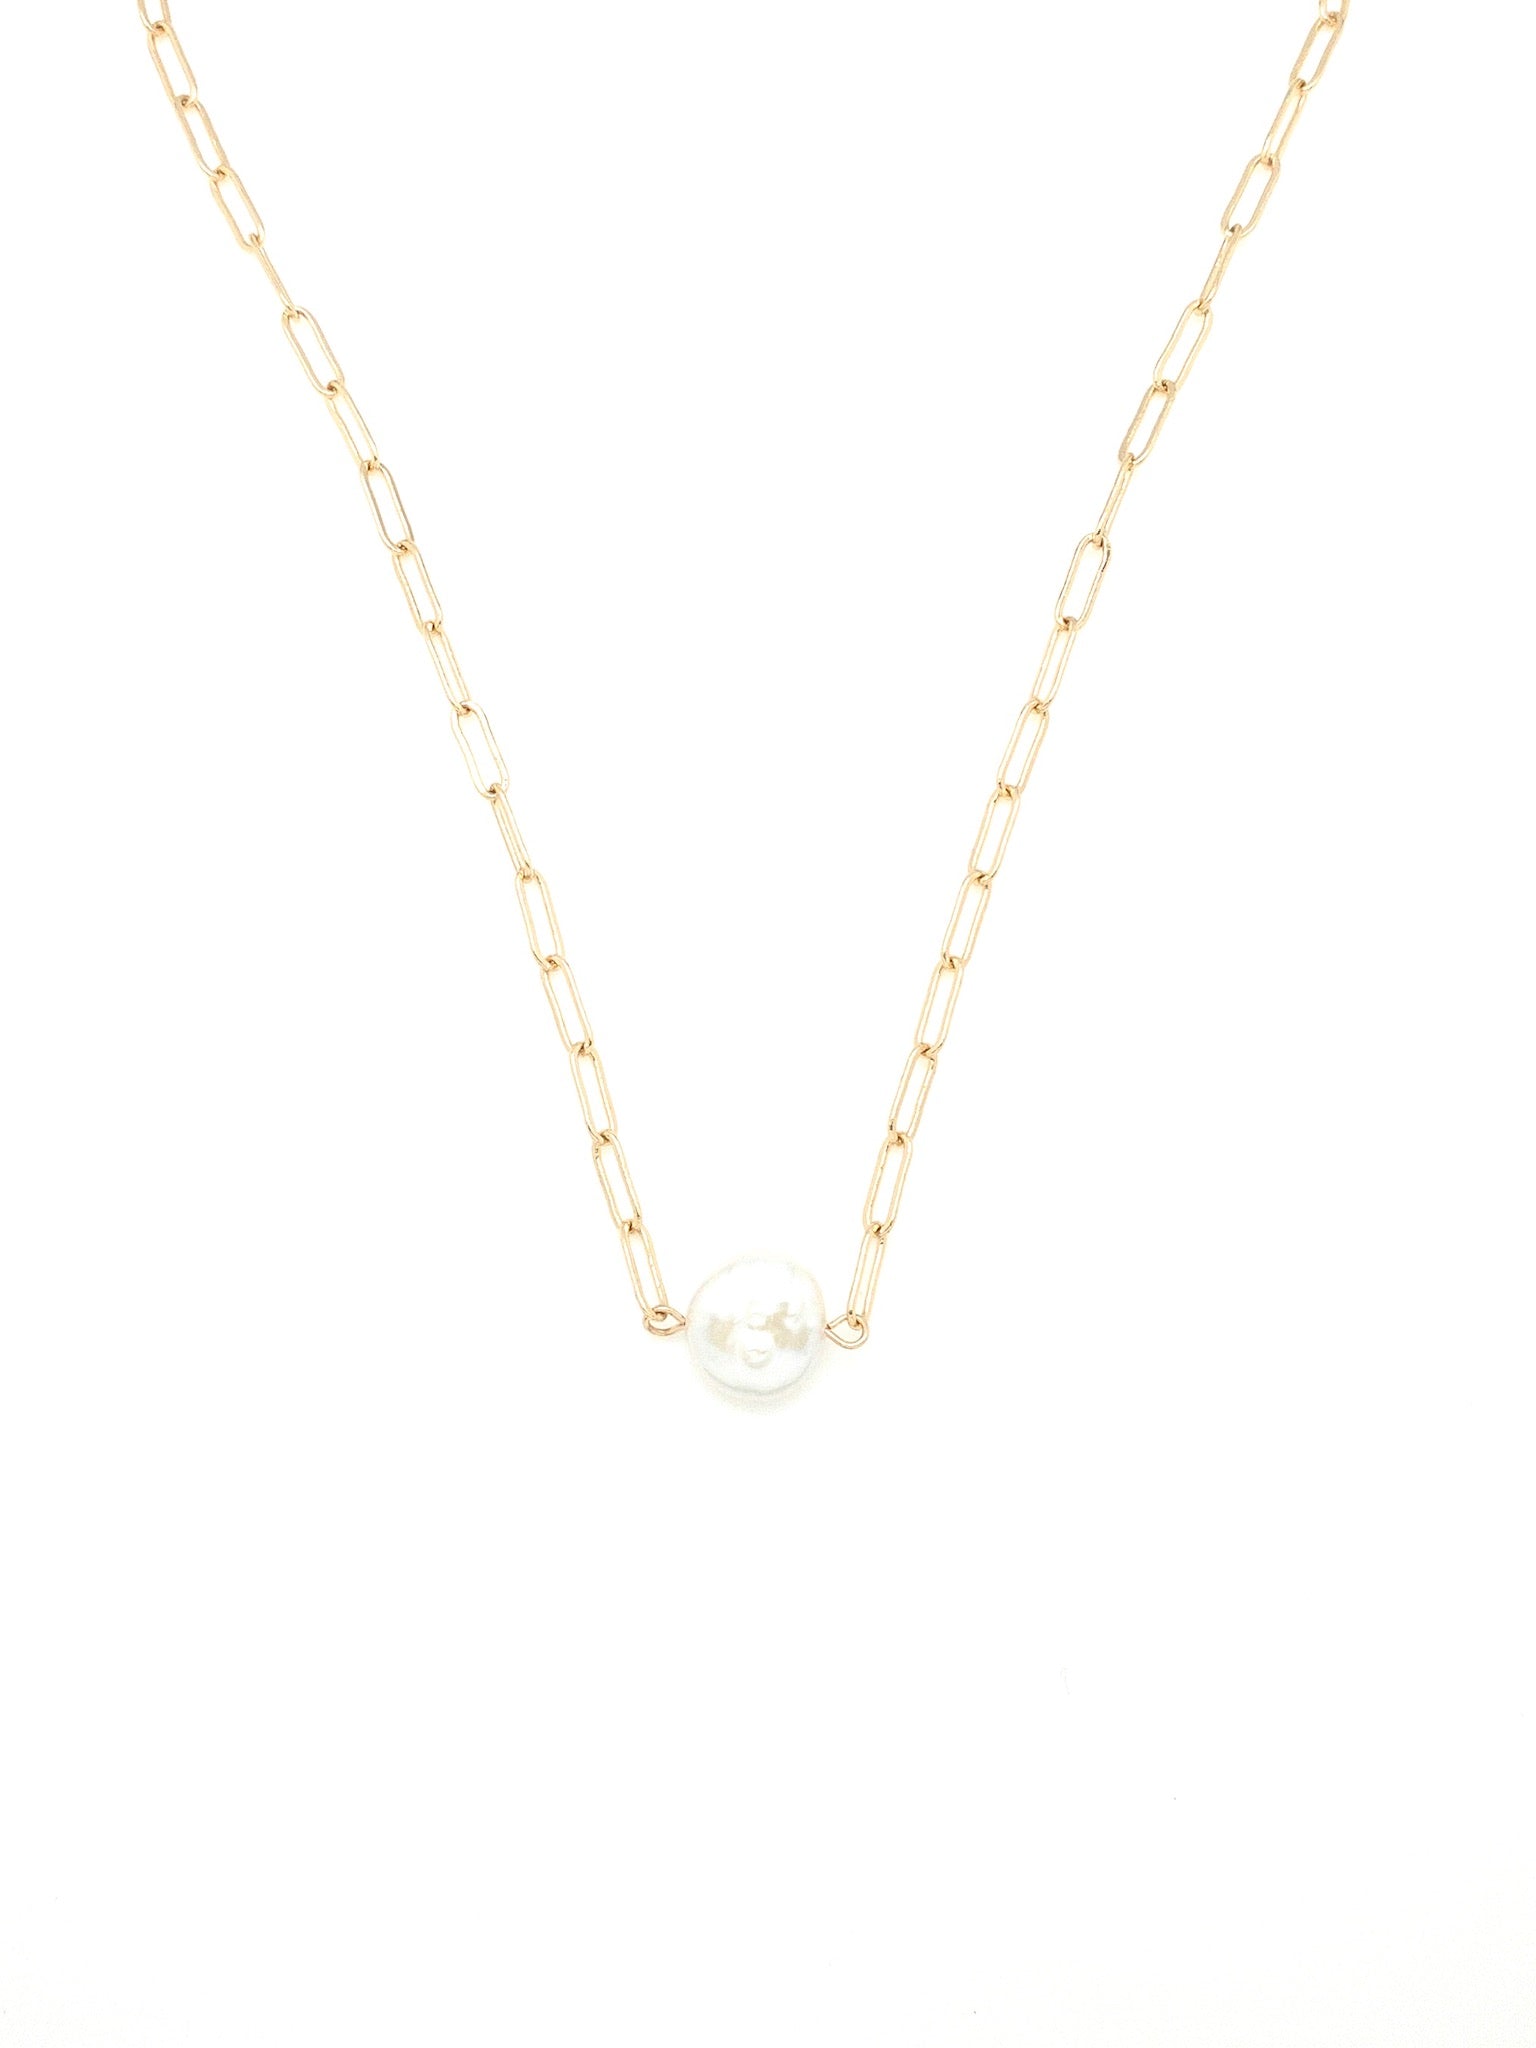 coin shaped pearl on a gold chain necklace 